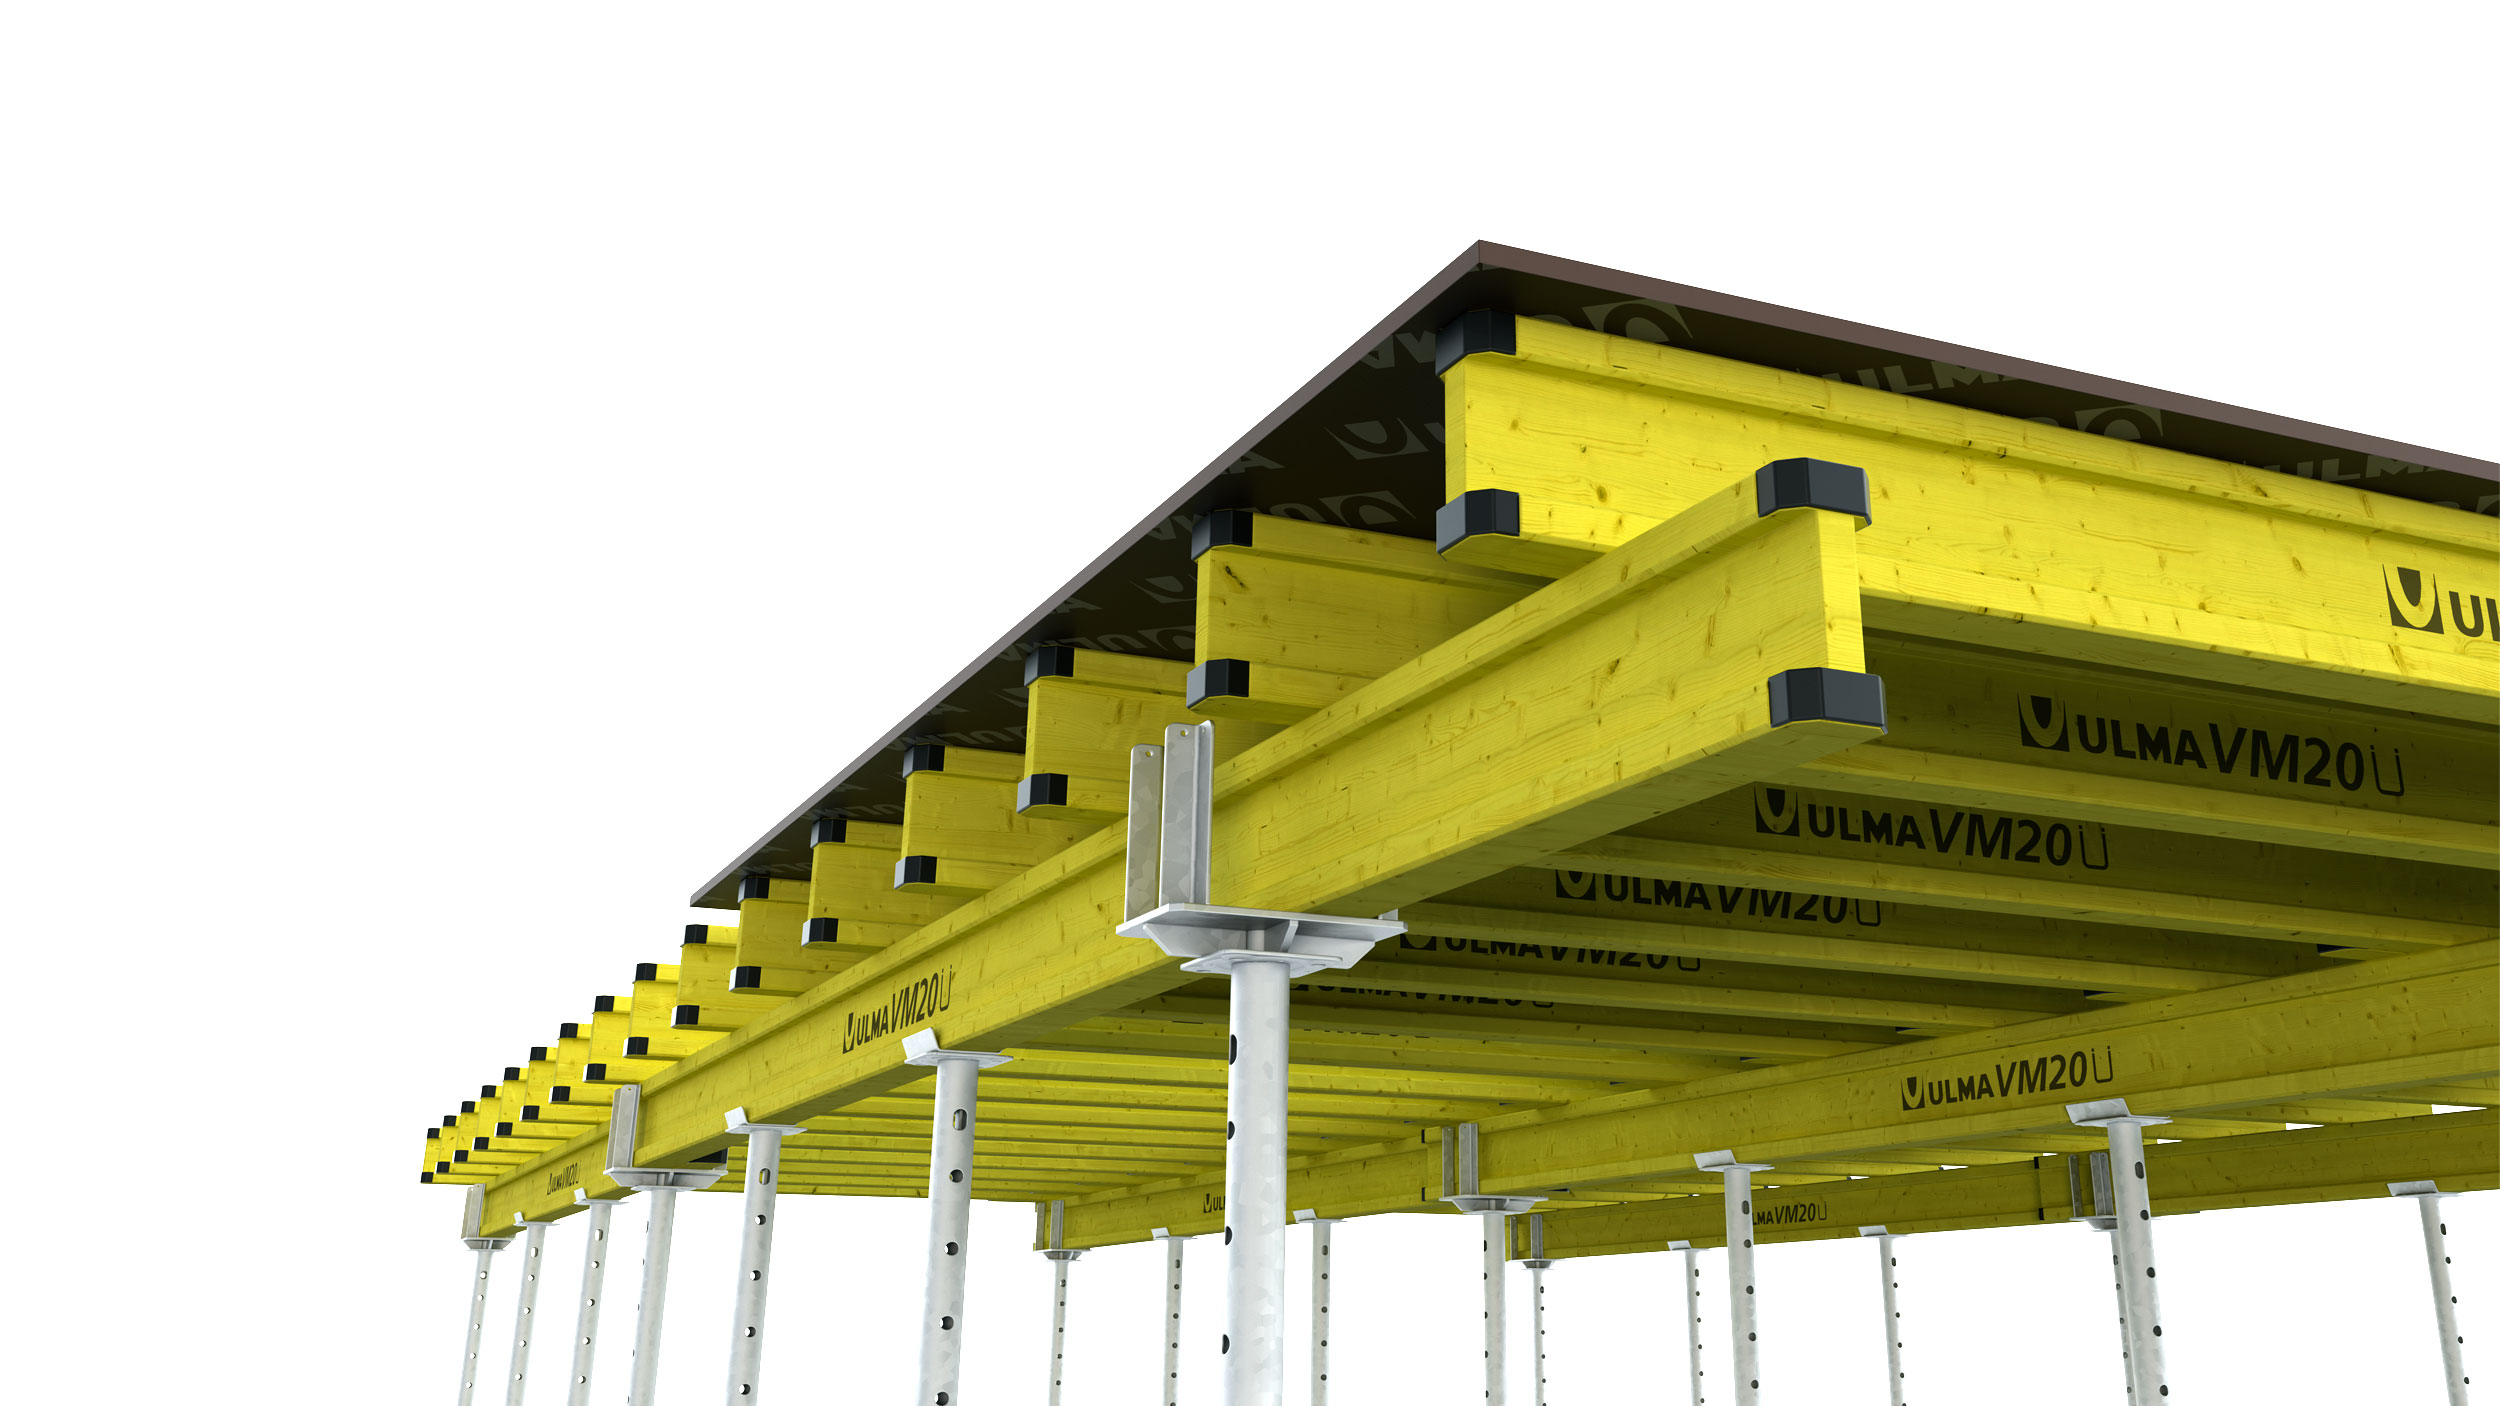 Double T-section timber beams for multiple forming and shoring applications. Lightweight, heavy duty and fitted with plastic caps to protect them against impact and moisture.